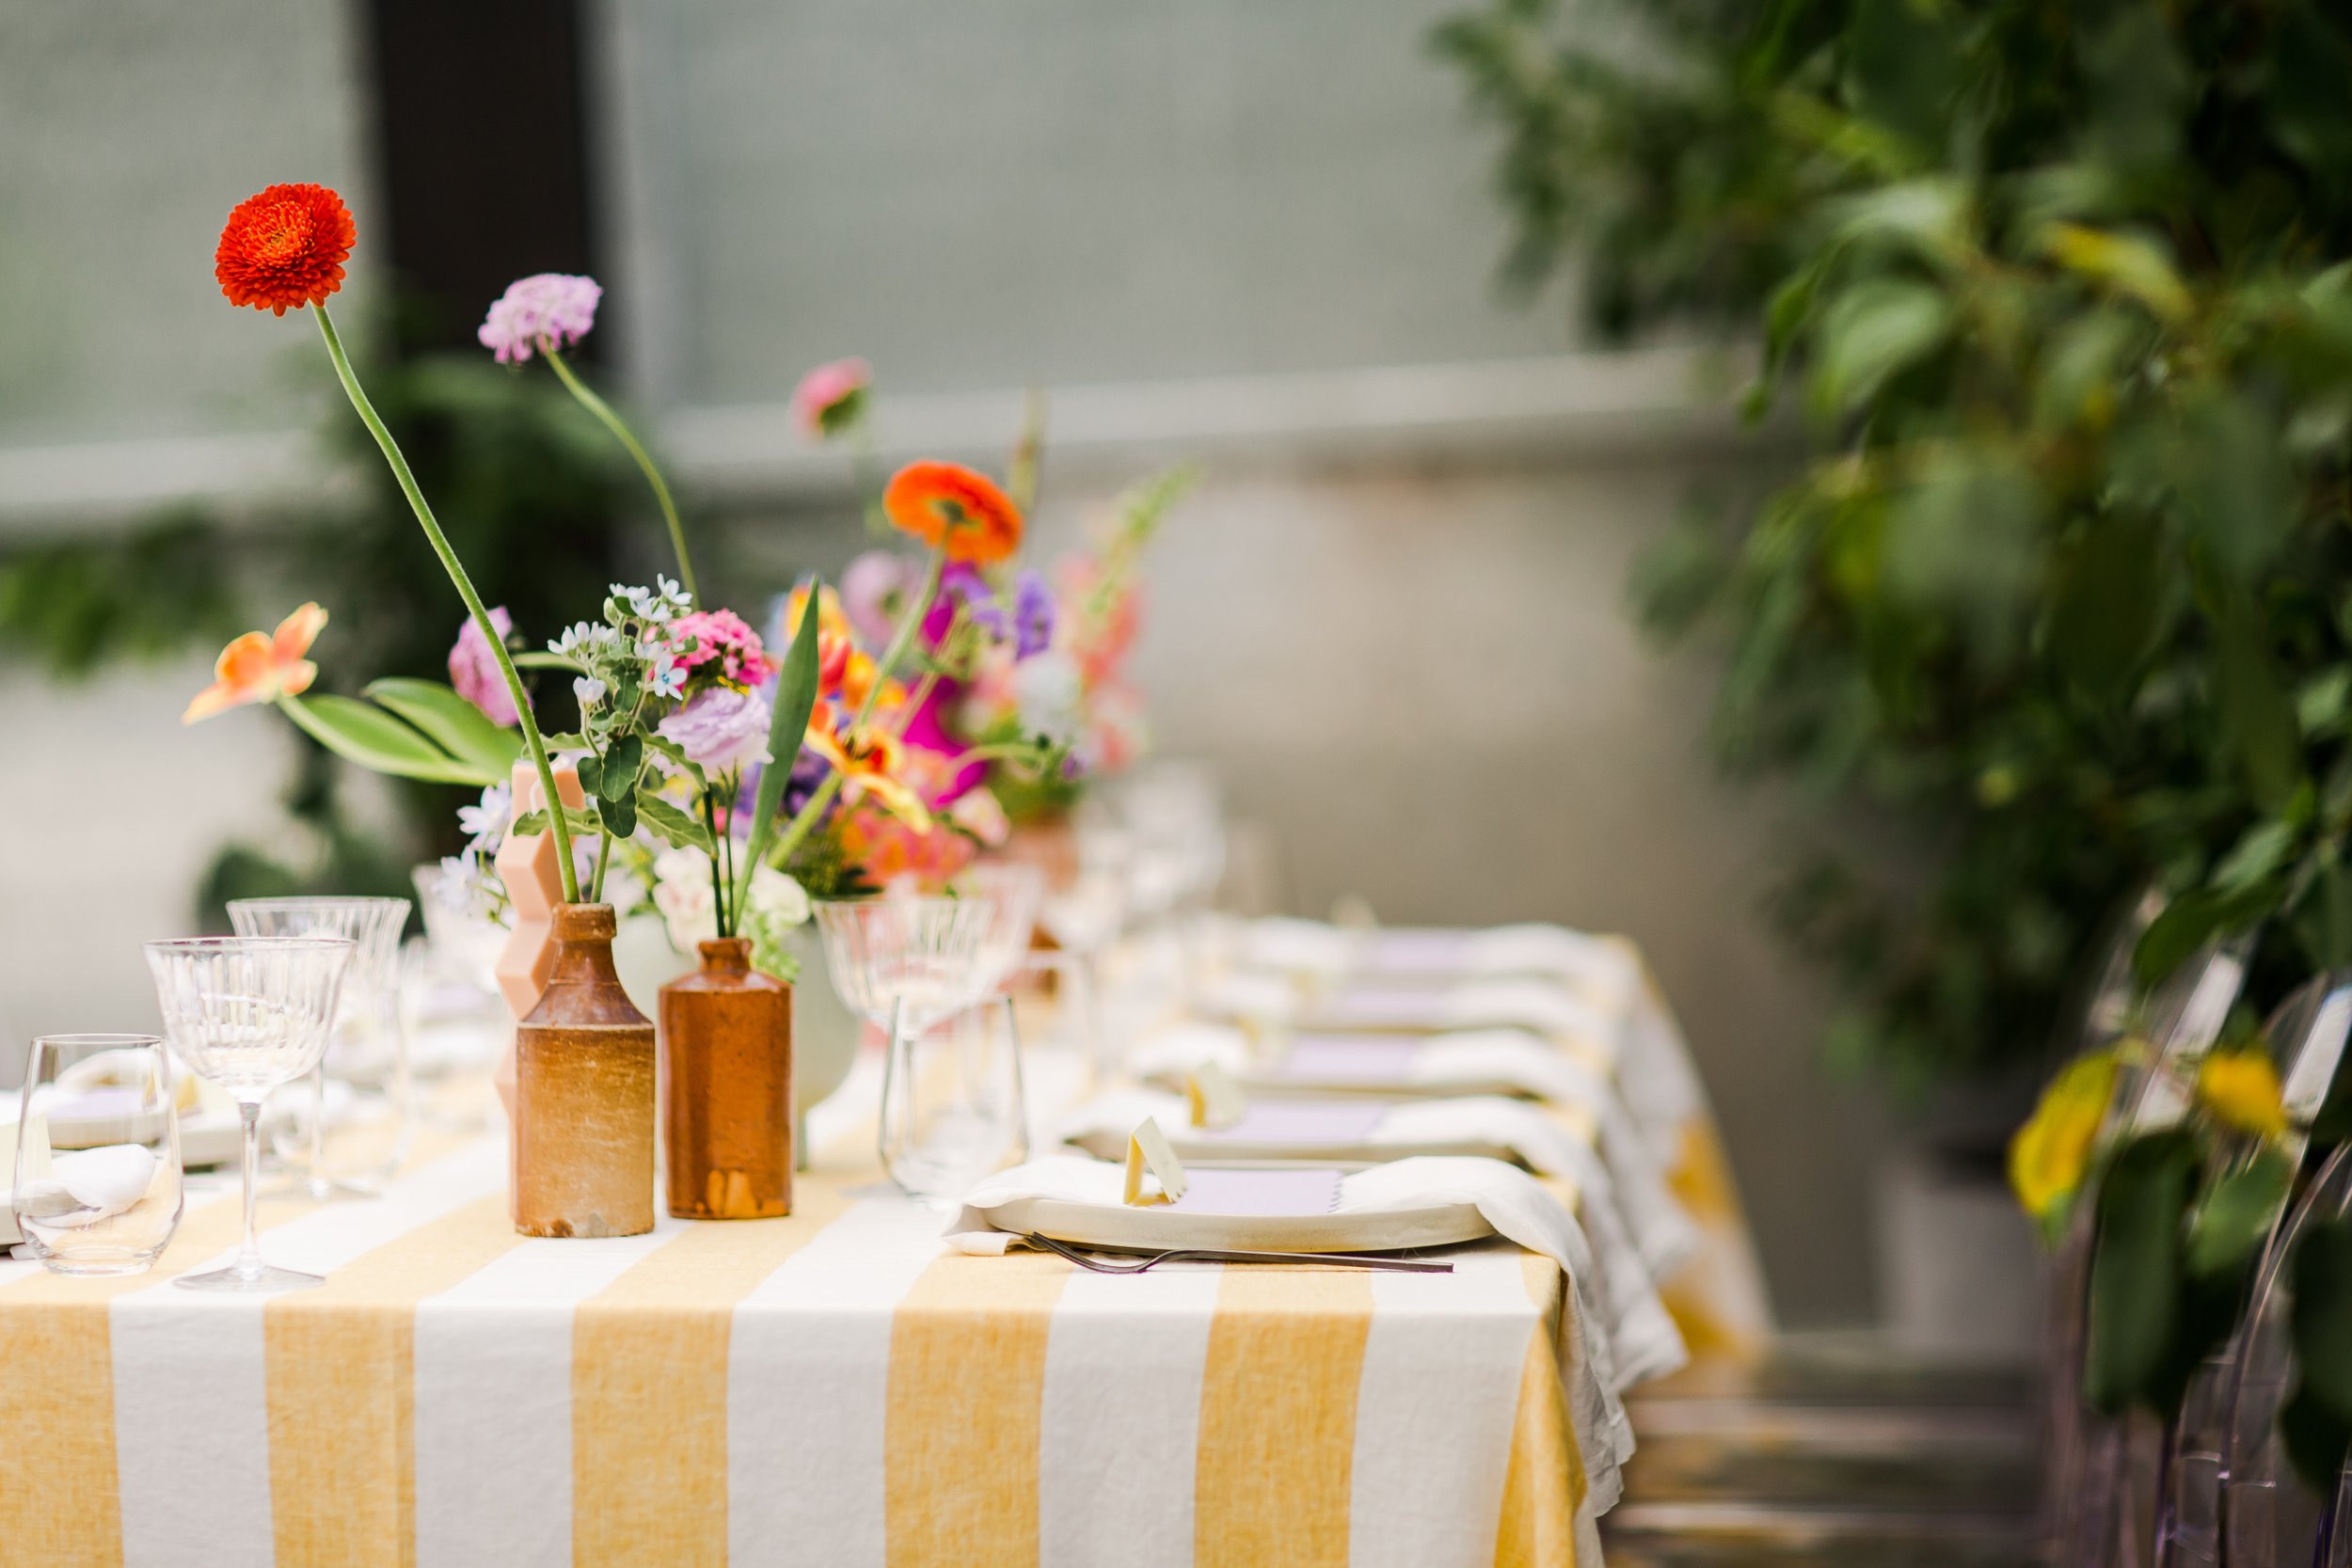 Beeswax stripe tablecloths with white napkins